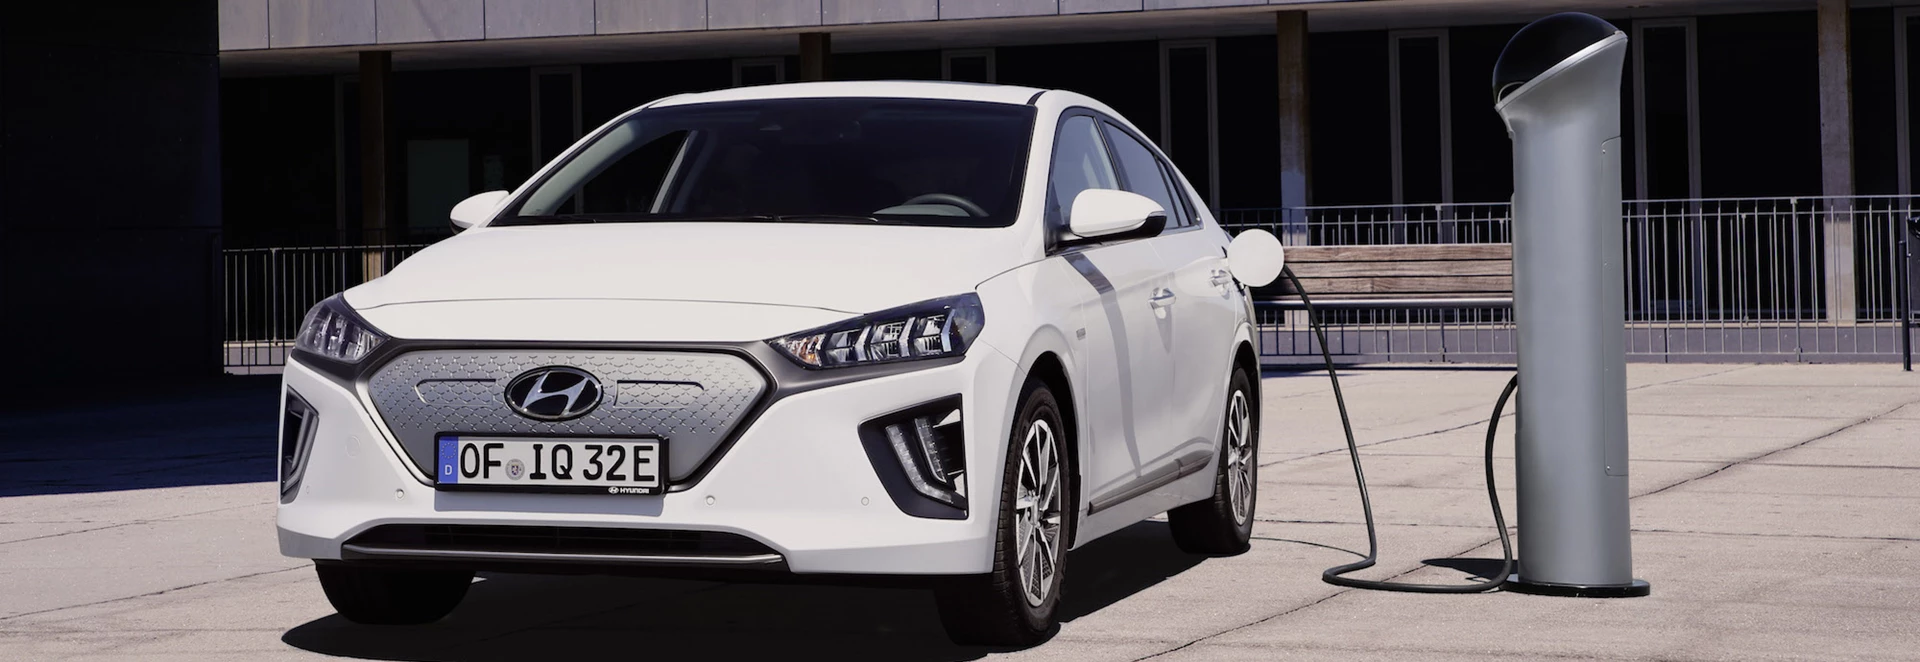 yundai IONIQ EV updated with improved battery and connectivity